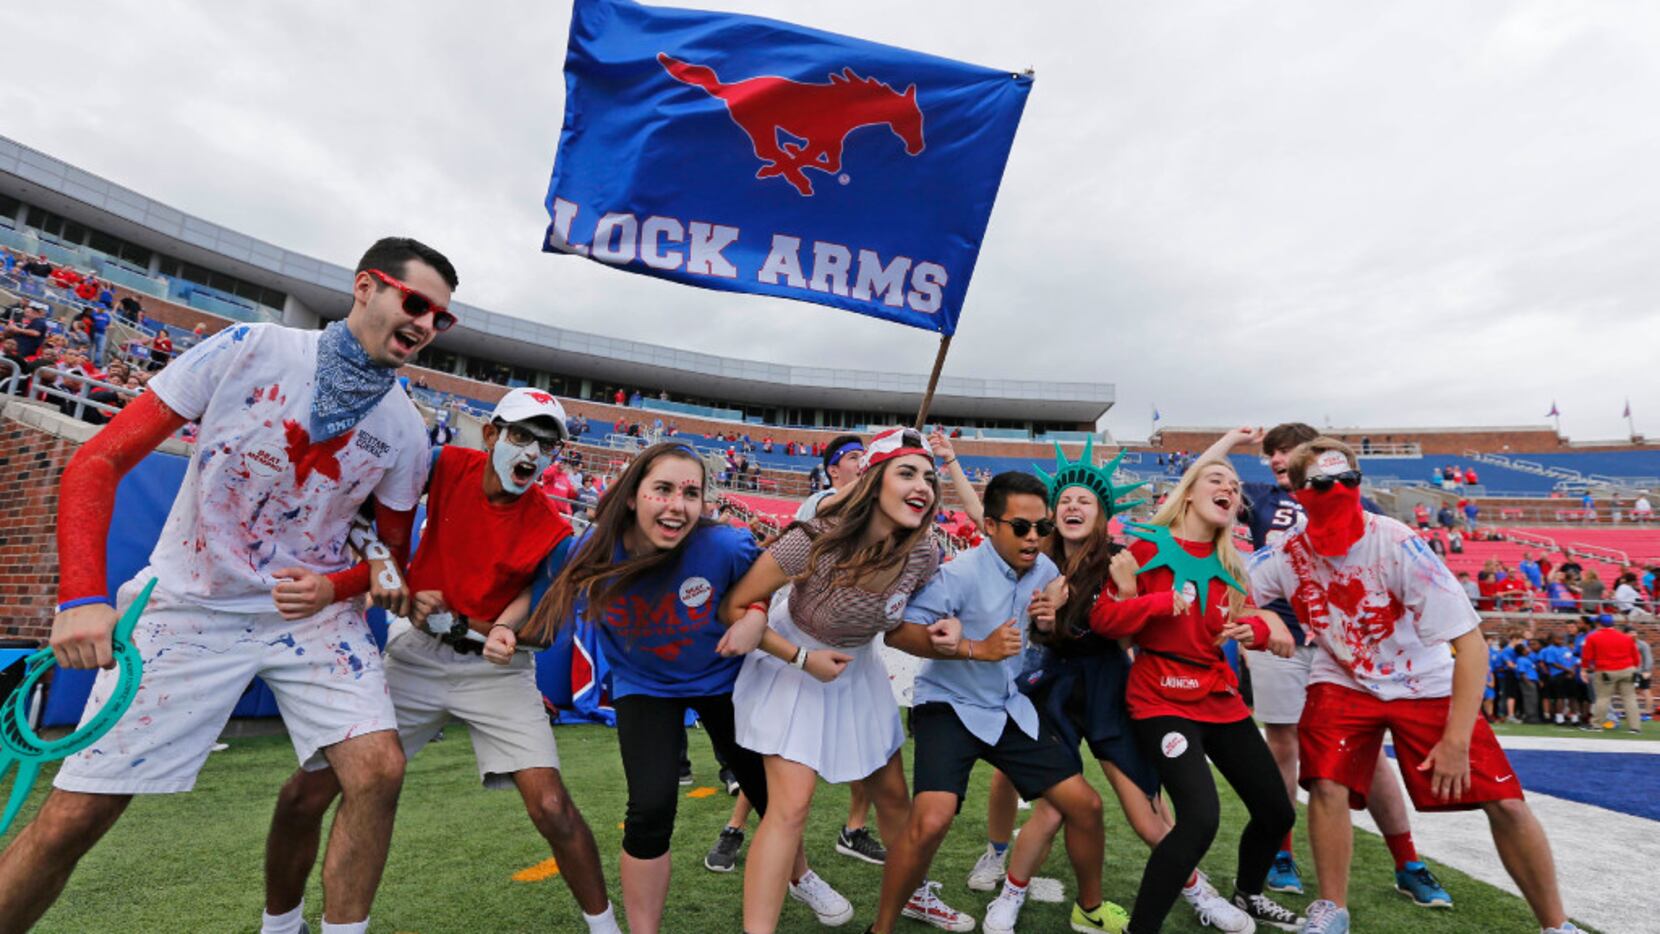 SMU fans get revved up before kickoff during the University of Memphis Tigers vs. the SMU...